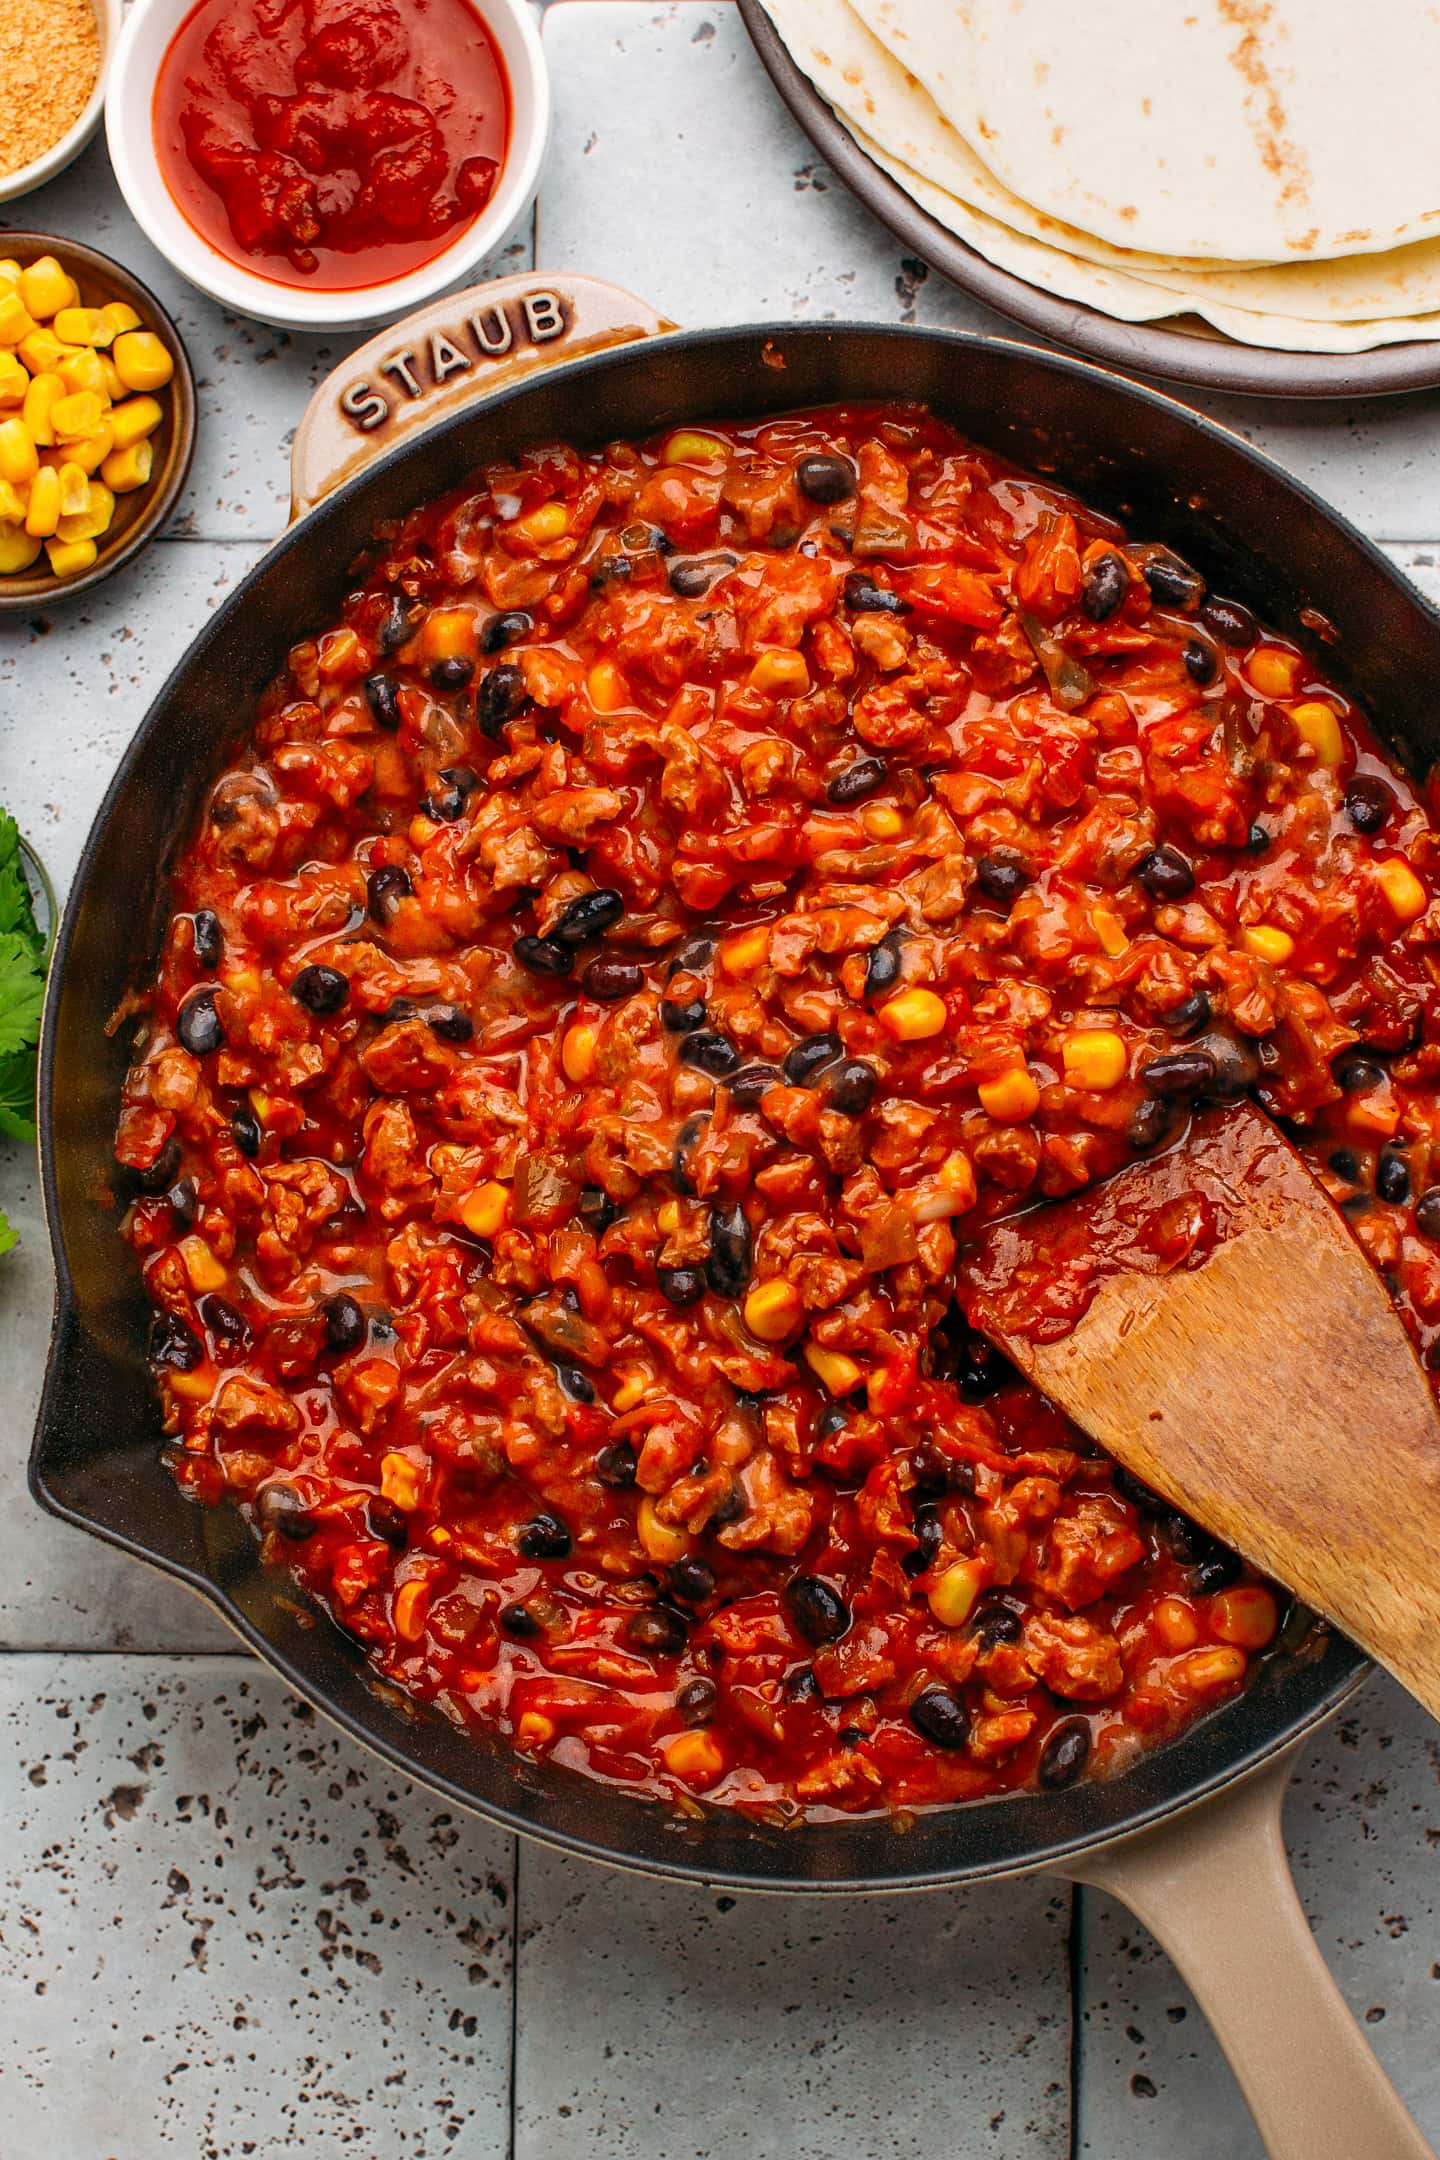 Beans, corn, and enchilada sauce in a skillet.